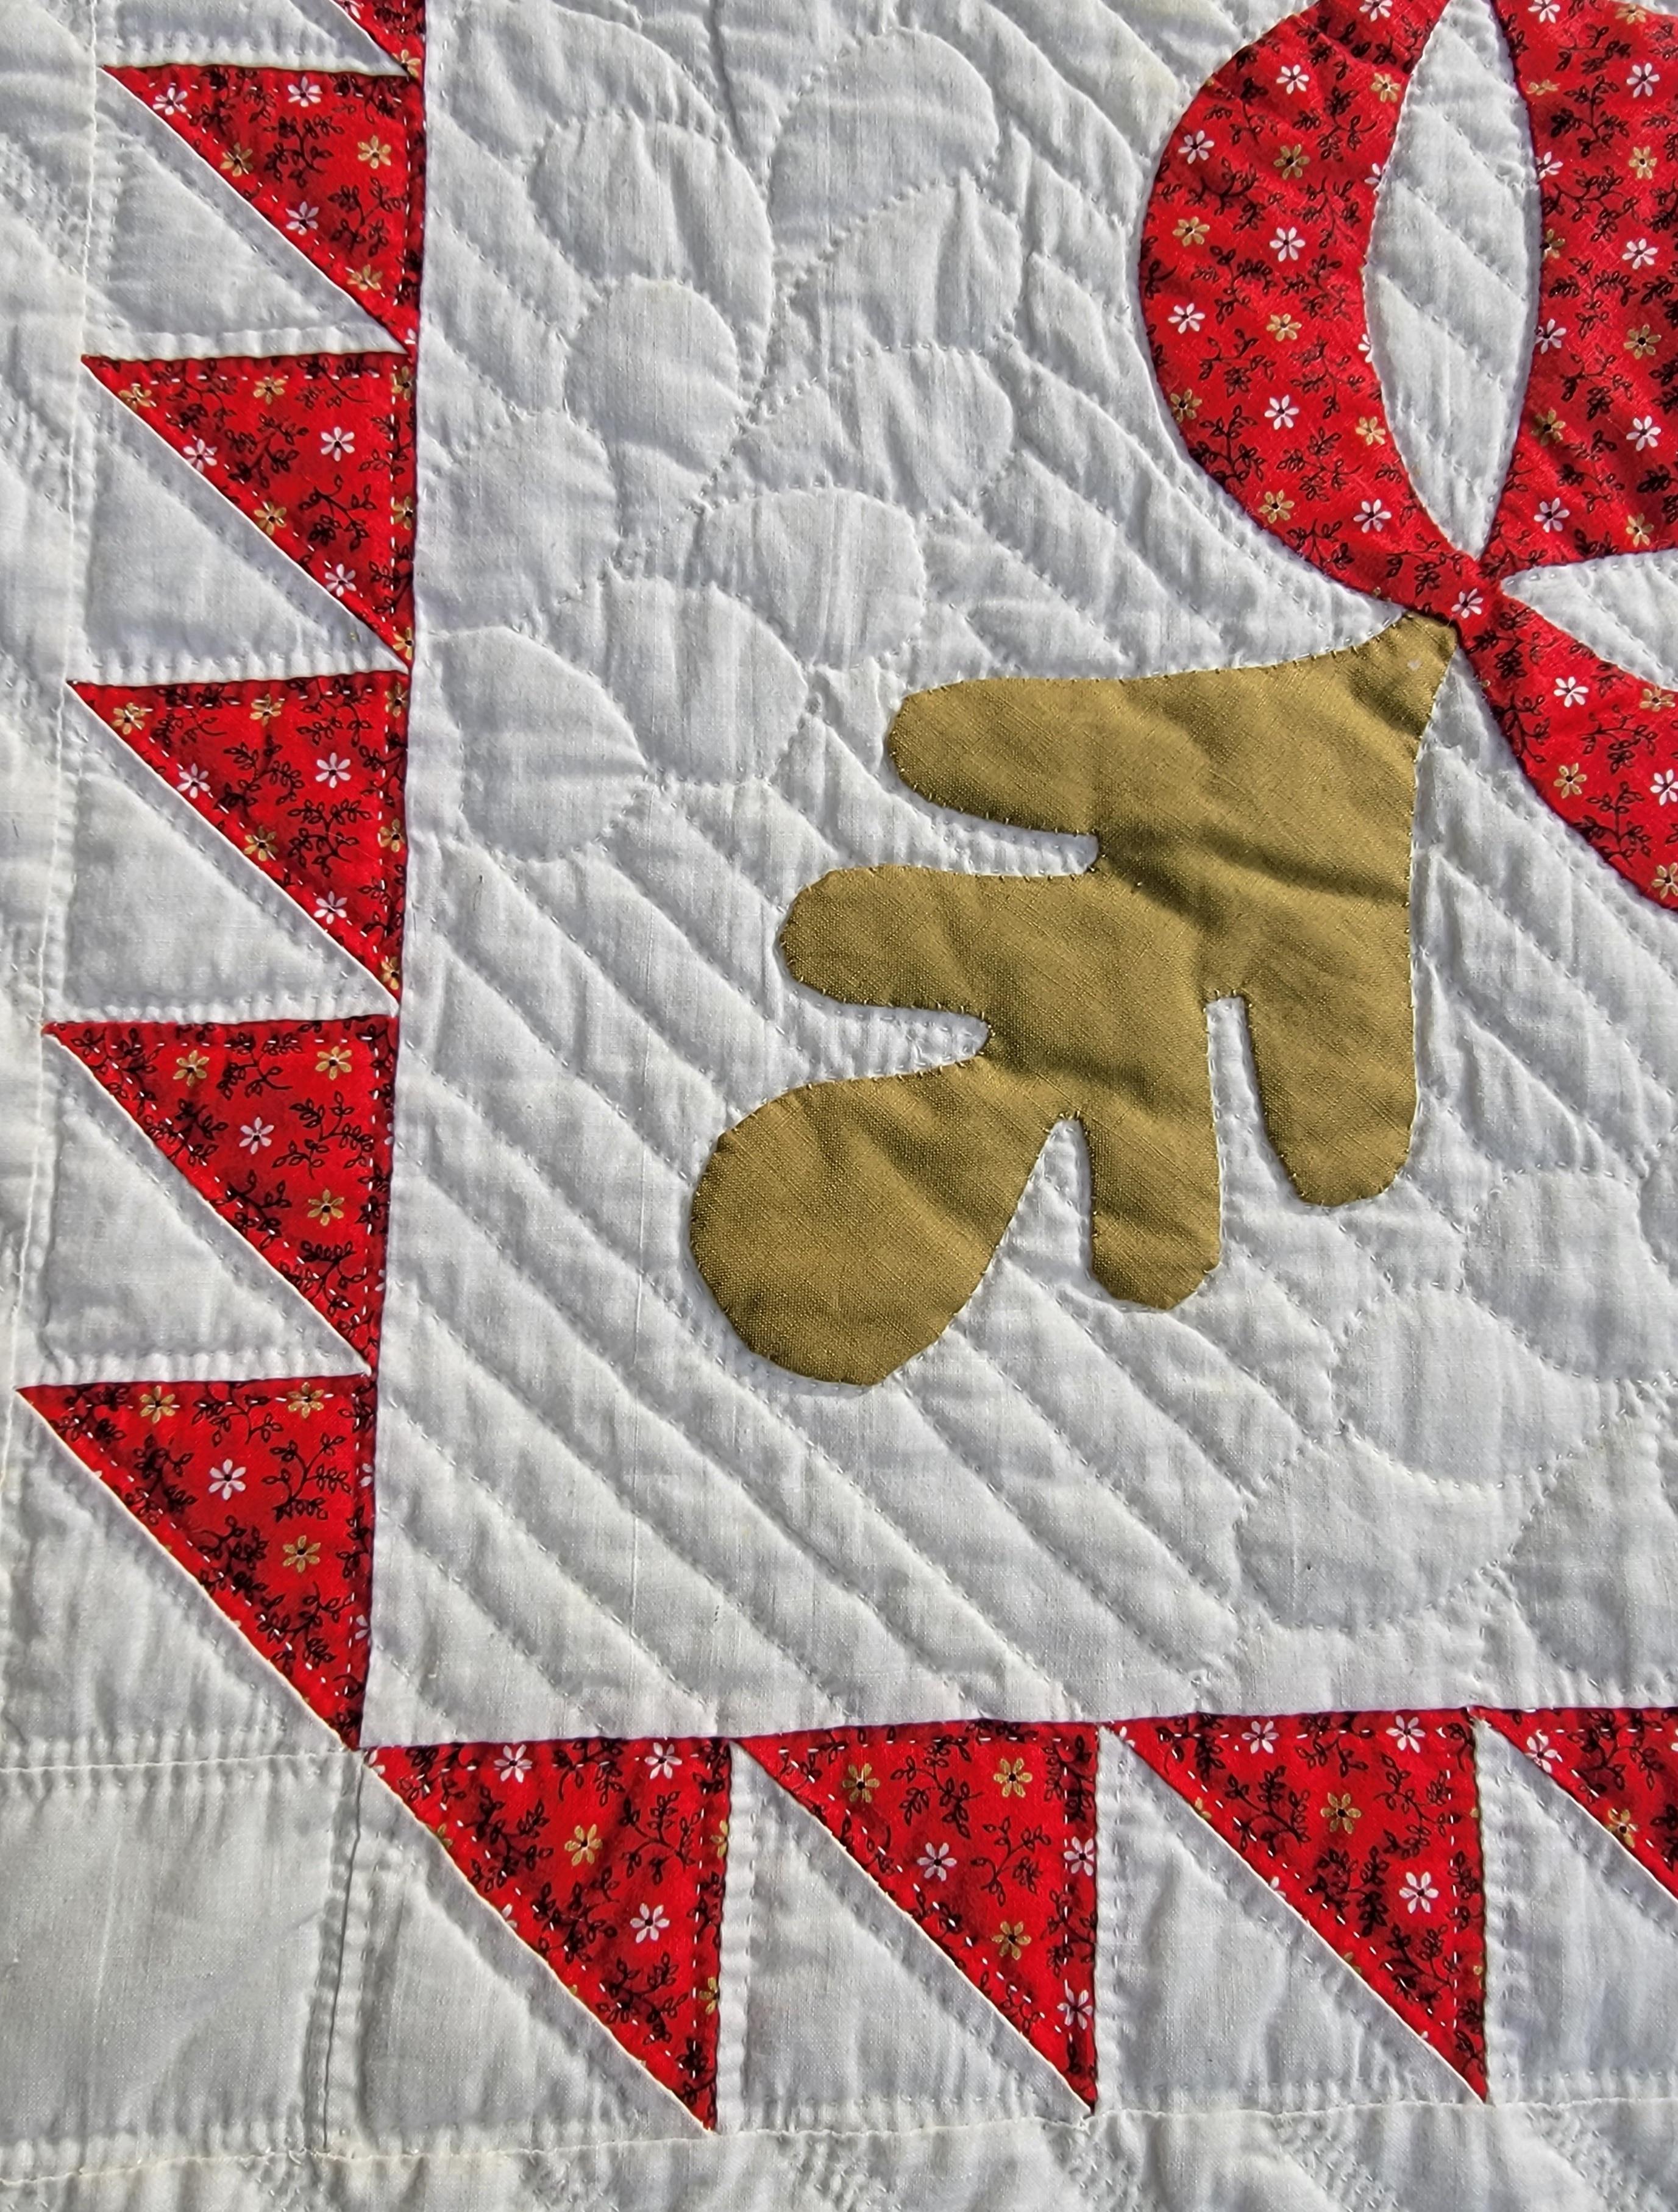 American Antique Applique Quilt with Swag Border For Sale